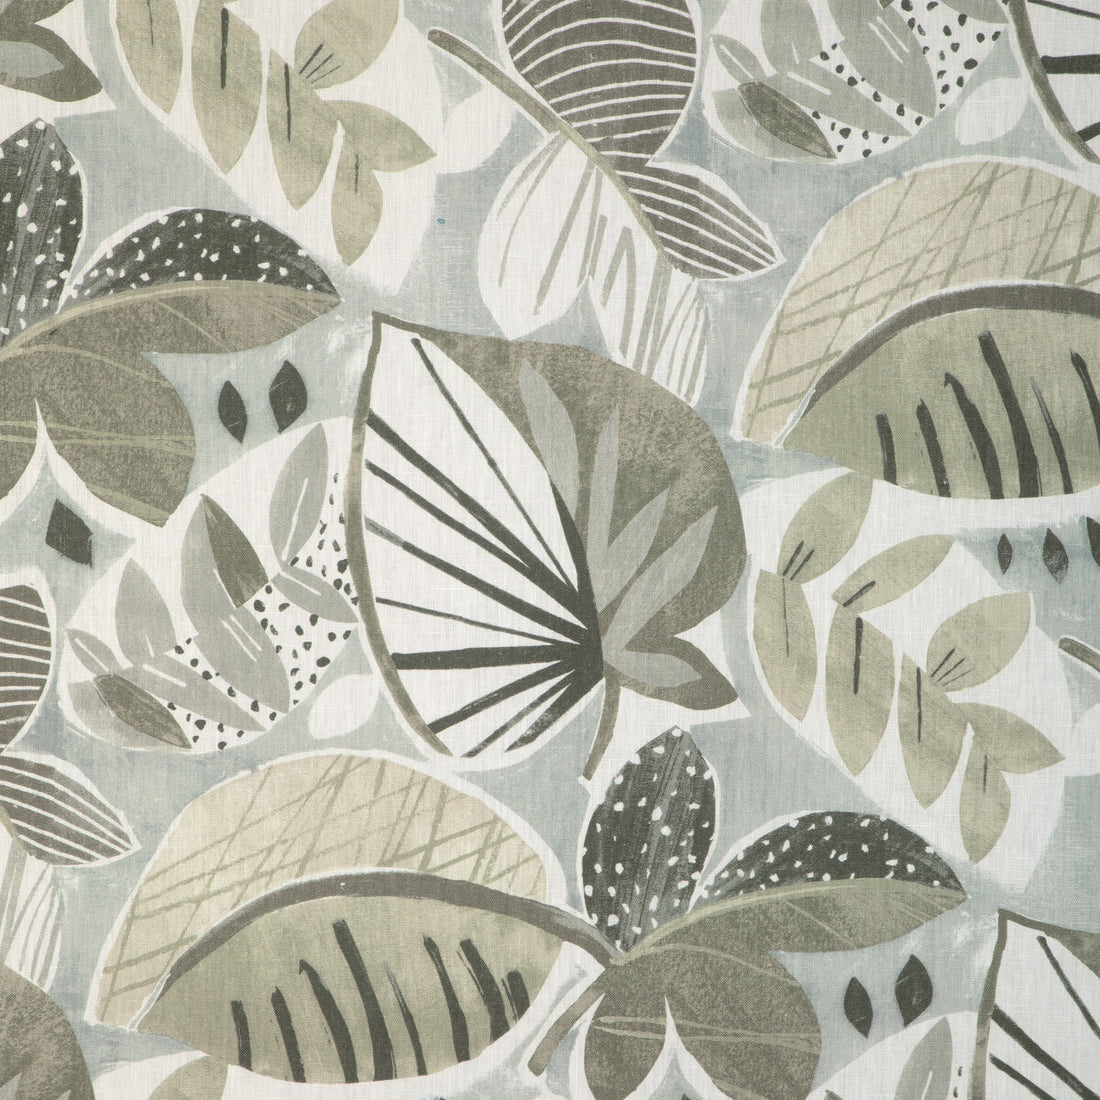 Leaf-A-Lot fabric in rattan color - pattern LEAF-A-LOT.6.0 - by Kravet Basics in the Mid-Century Modern collection